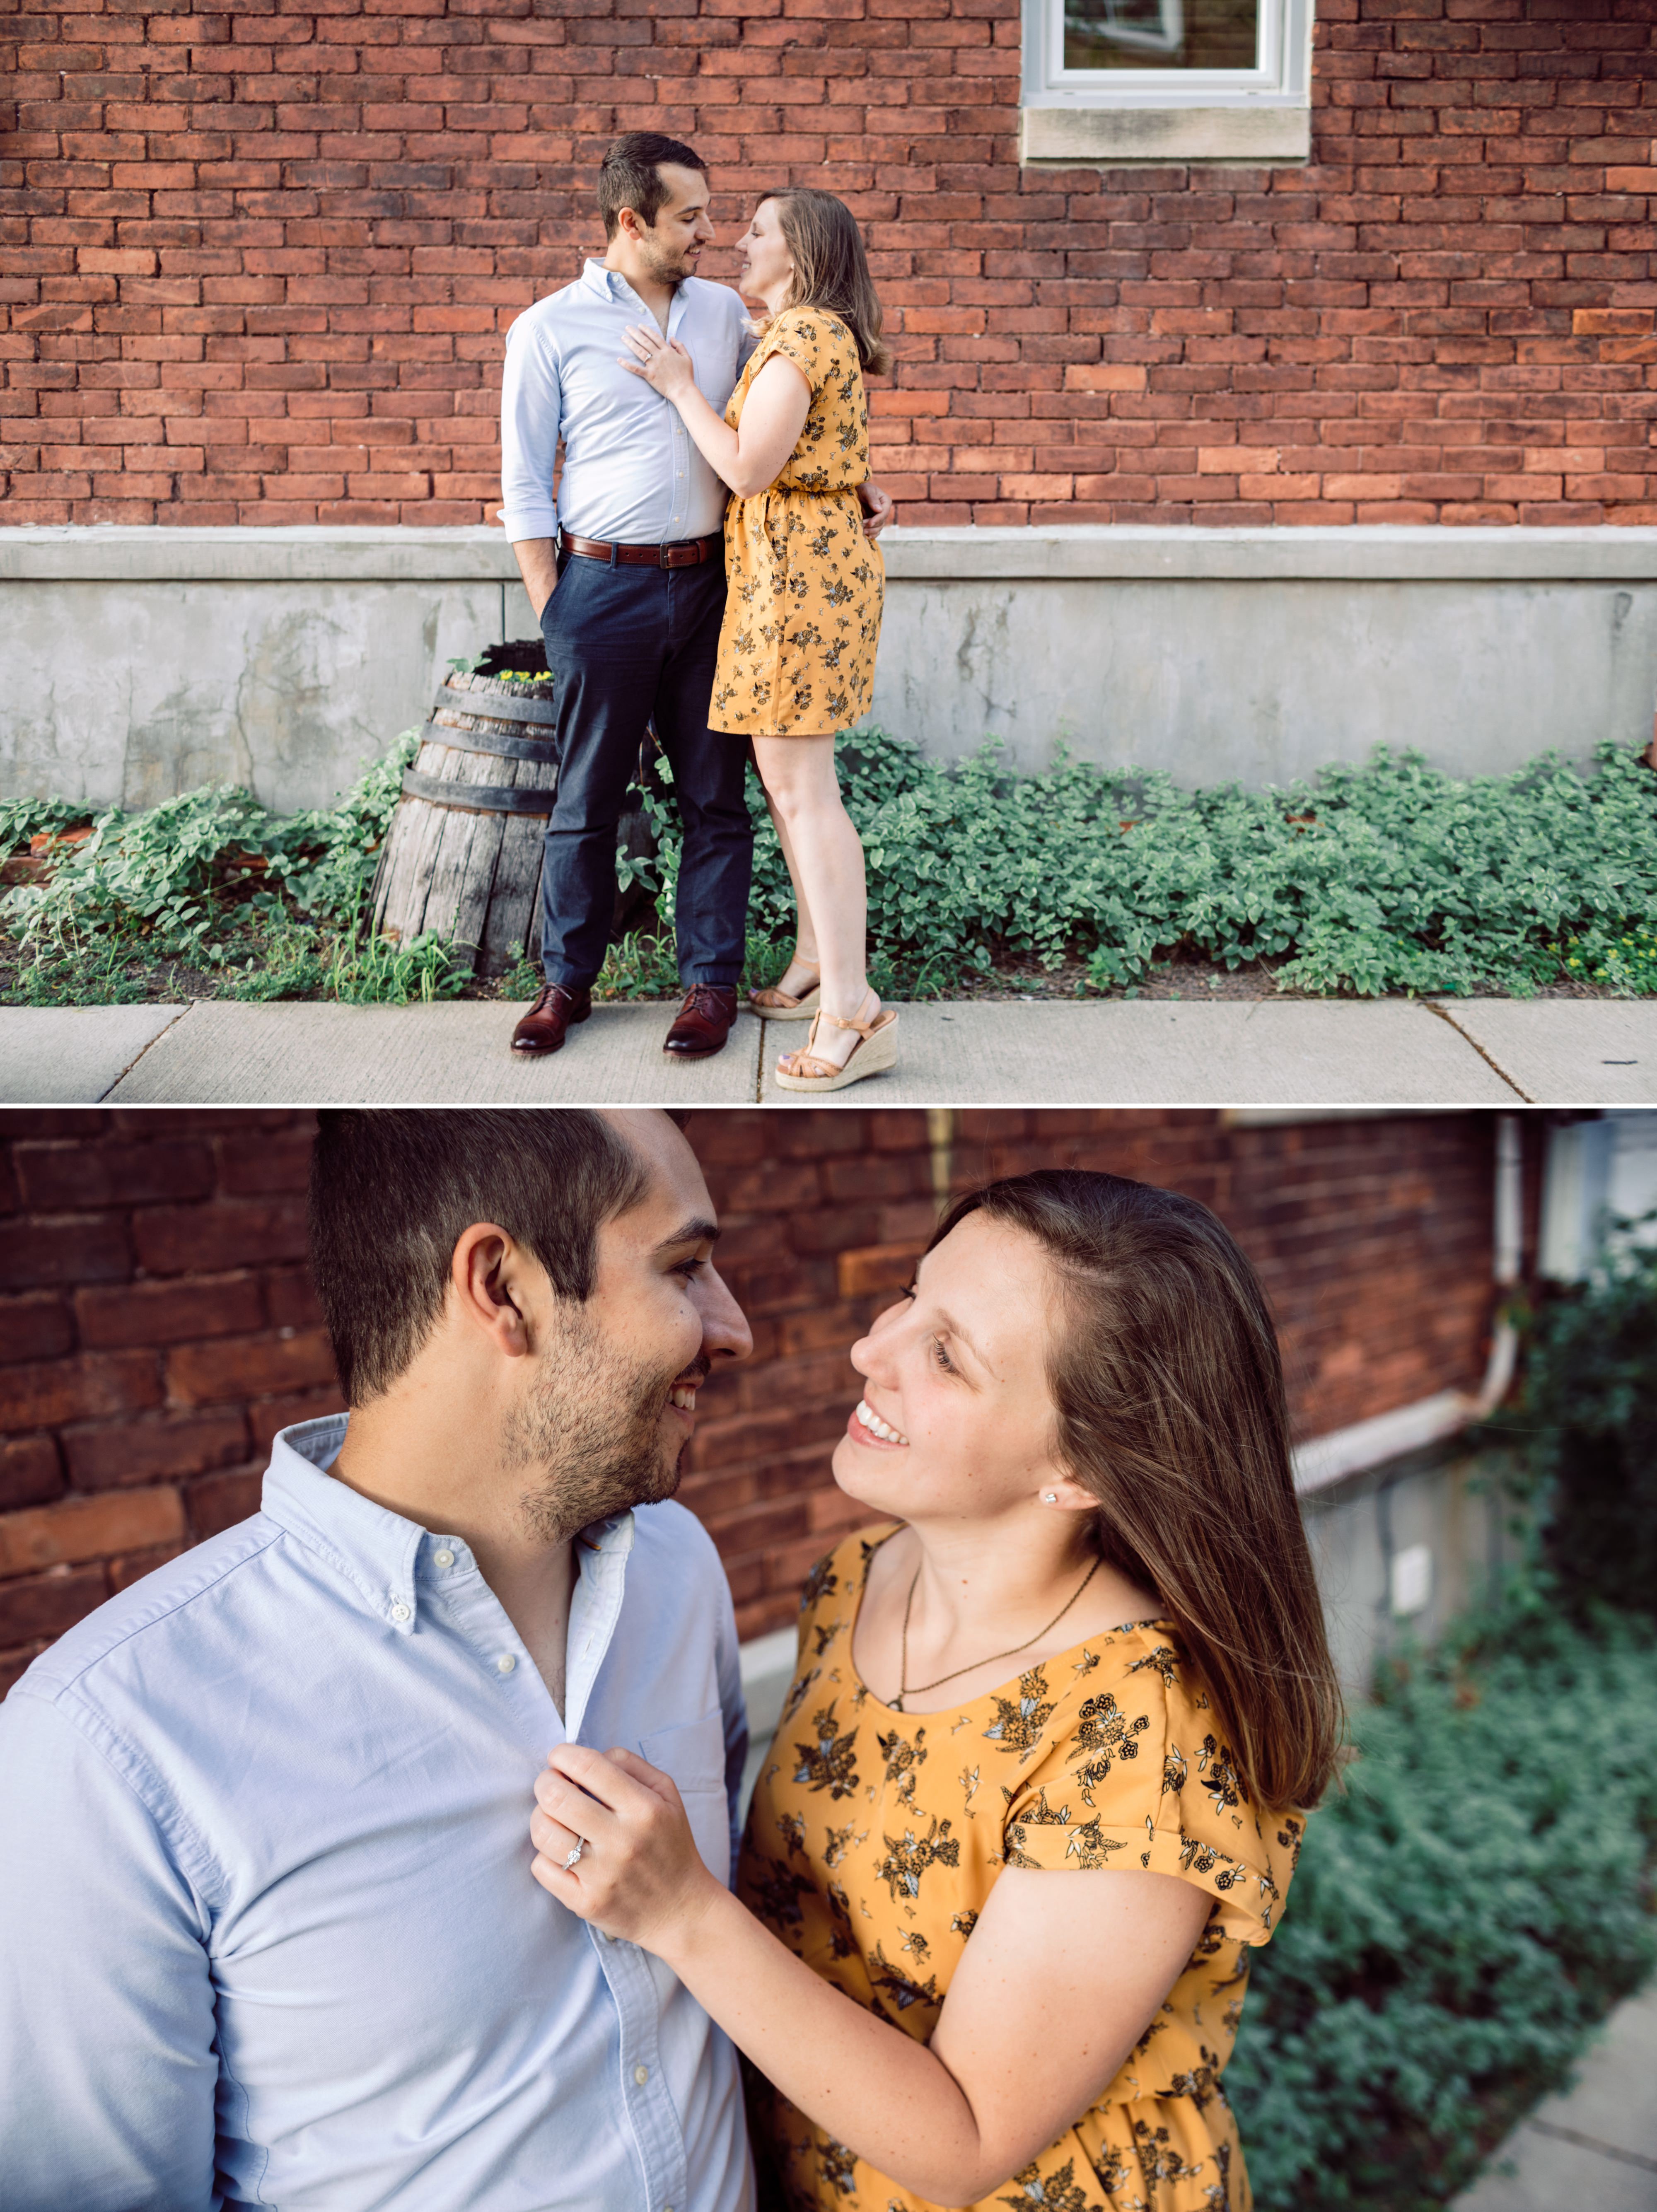 A couples Engagement Session in downtown wyandotte michigan